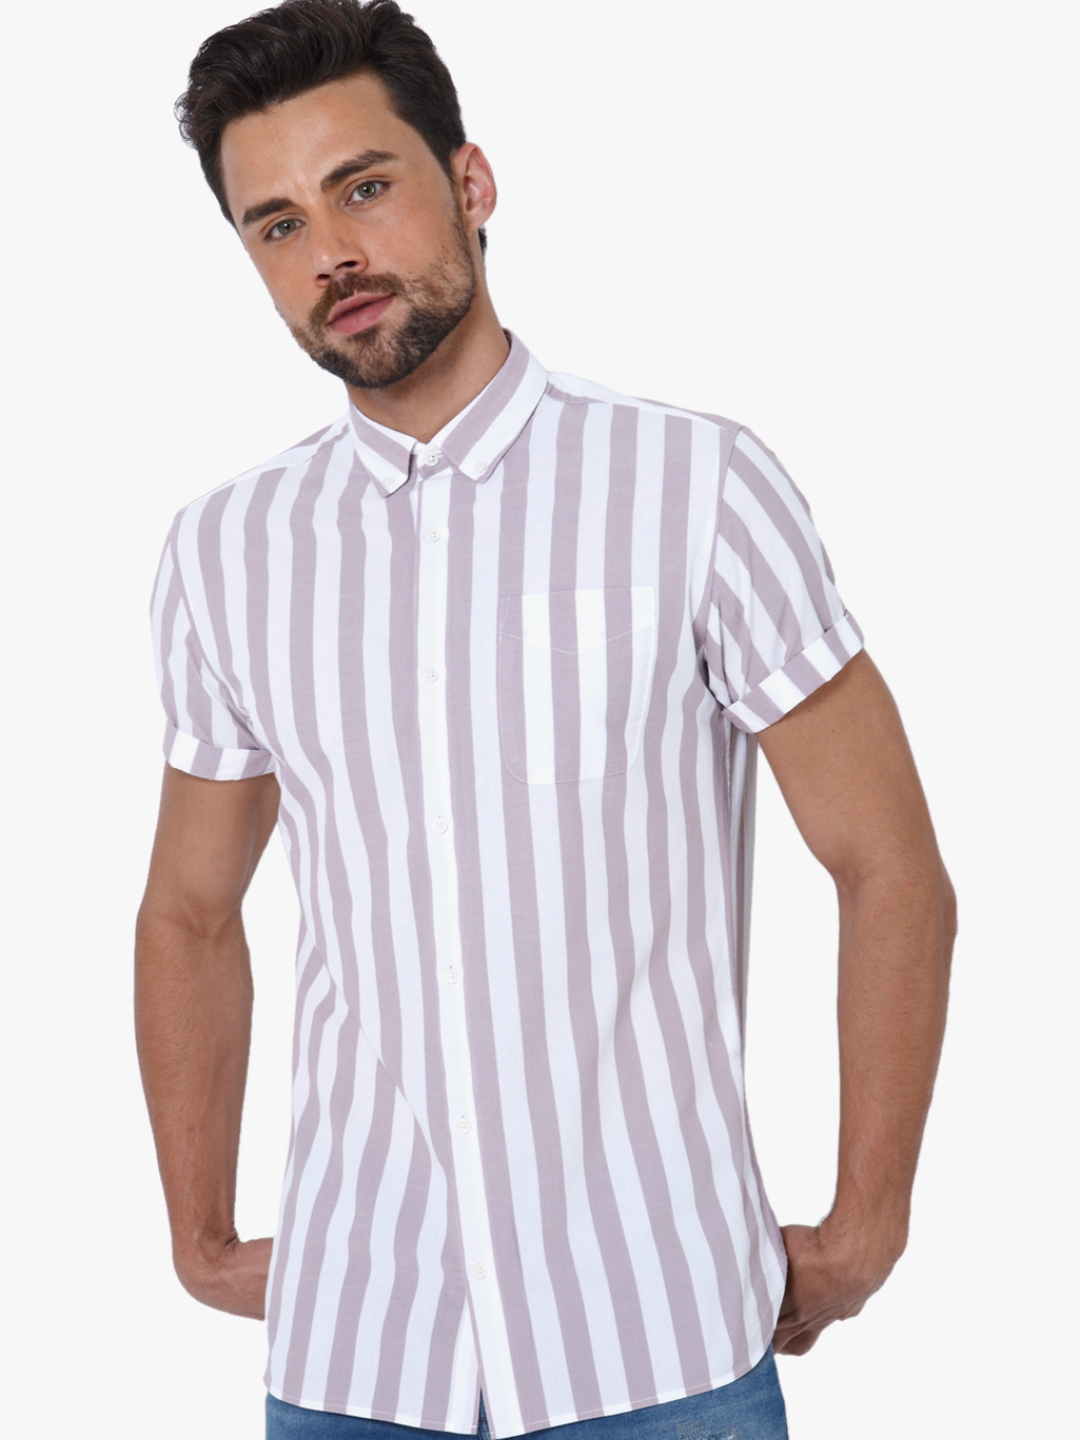 Buy White Striped Slim Fit Casual Shirt - Shirts for Men 7951243 | Myntra